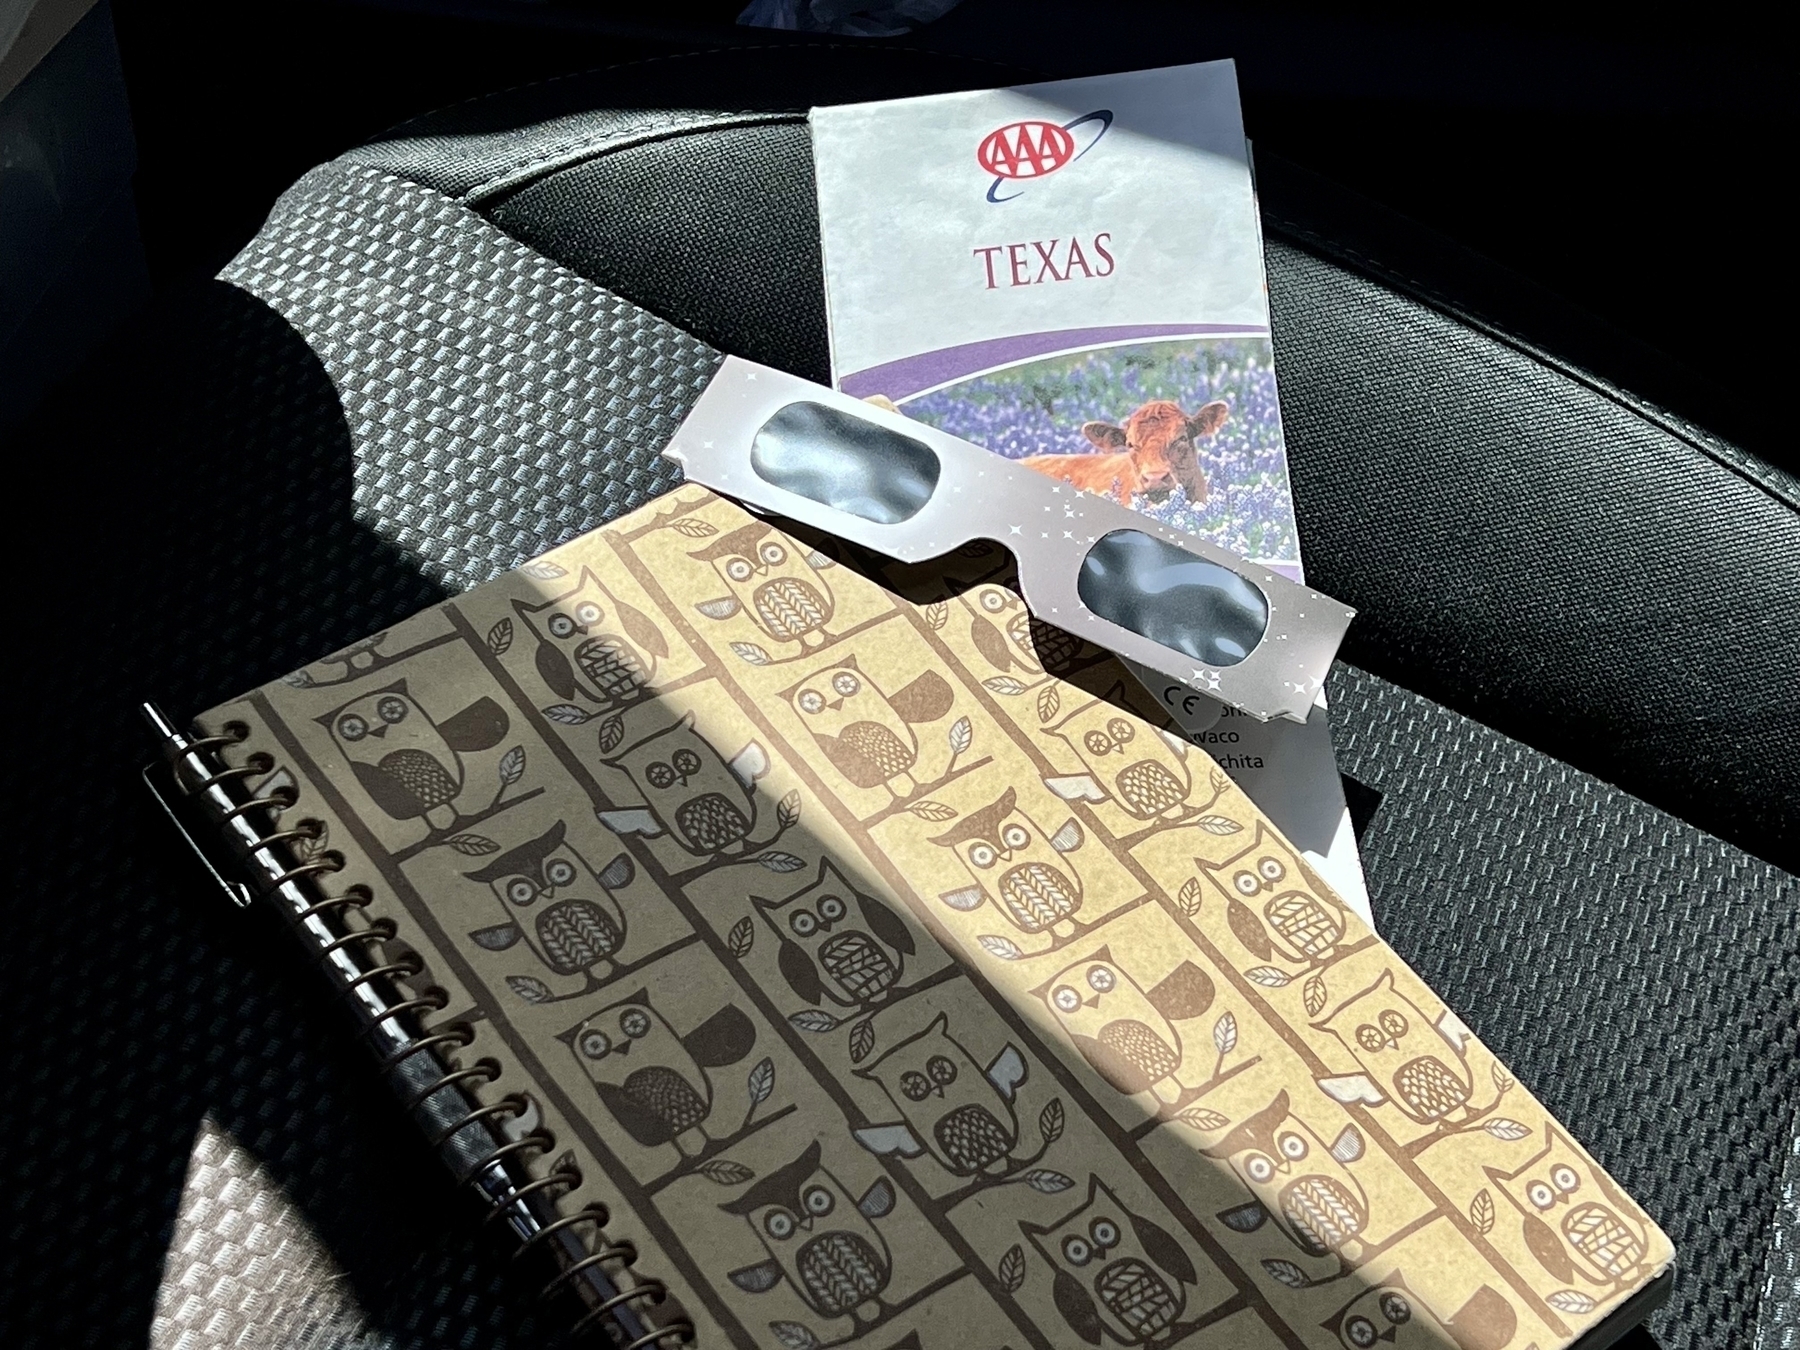 Passenger seat of a car with a notebook, map of Texas, and a pair of disposable solar eclipse safety glasses.